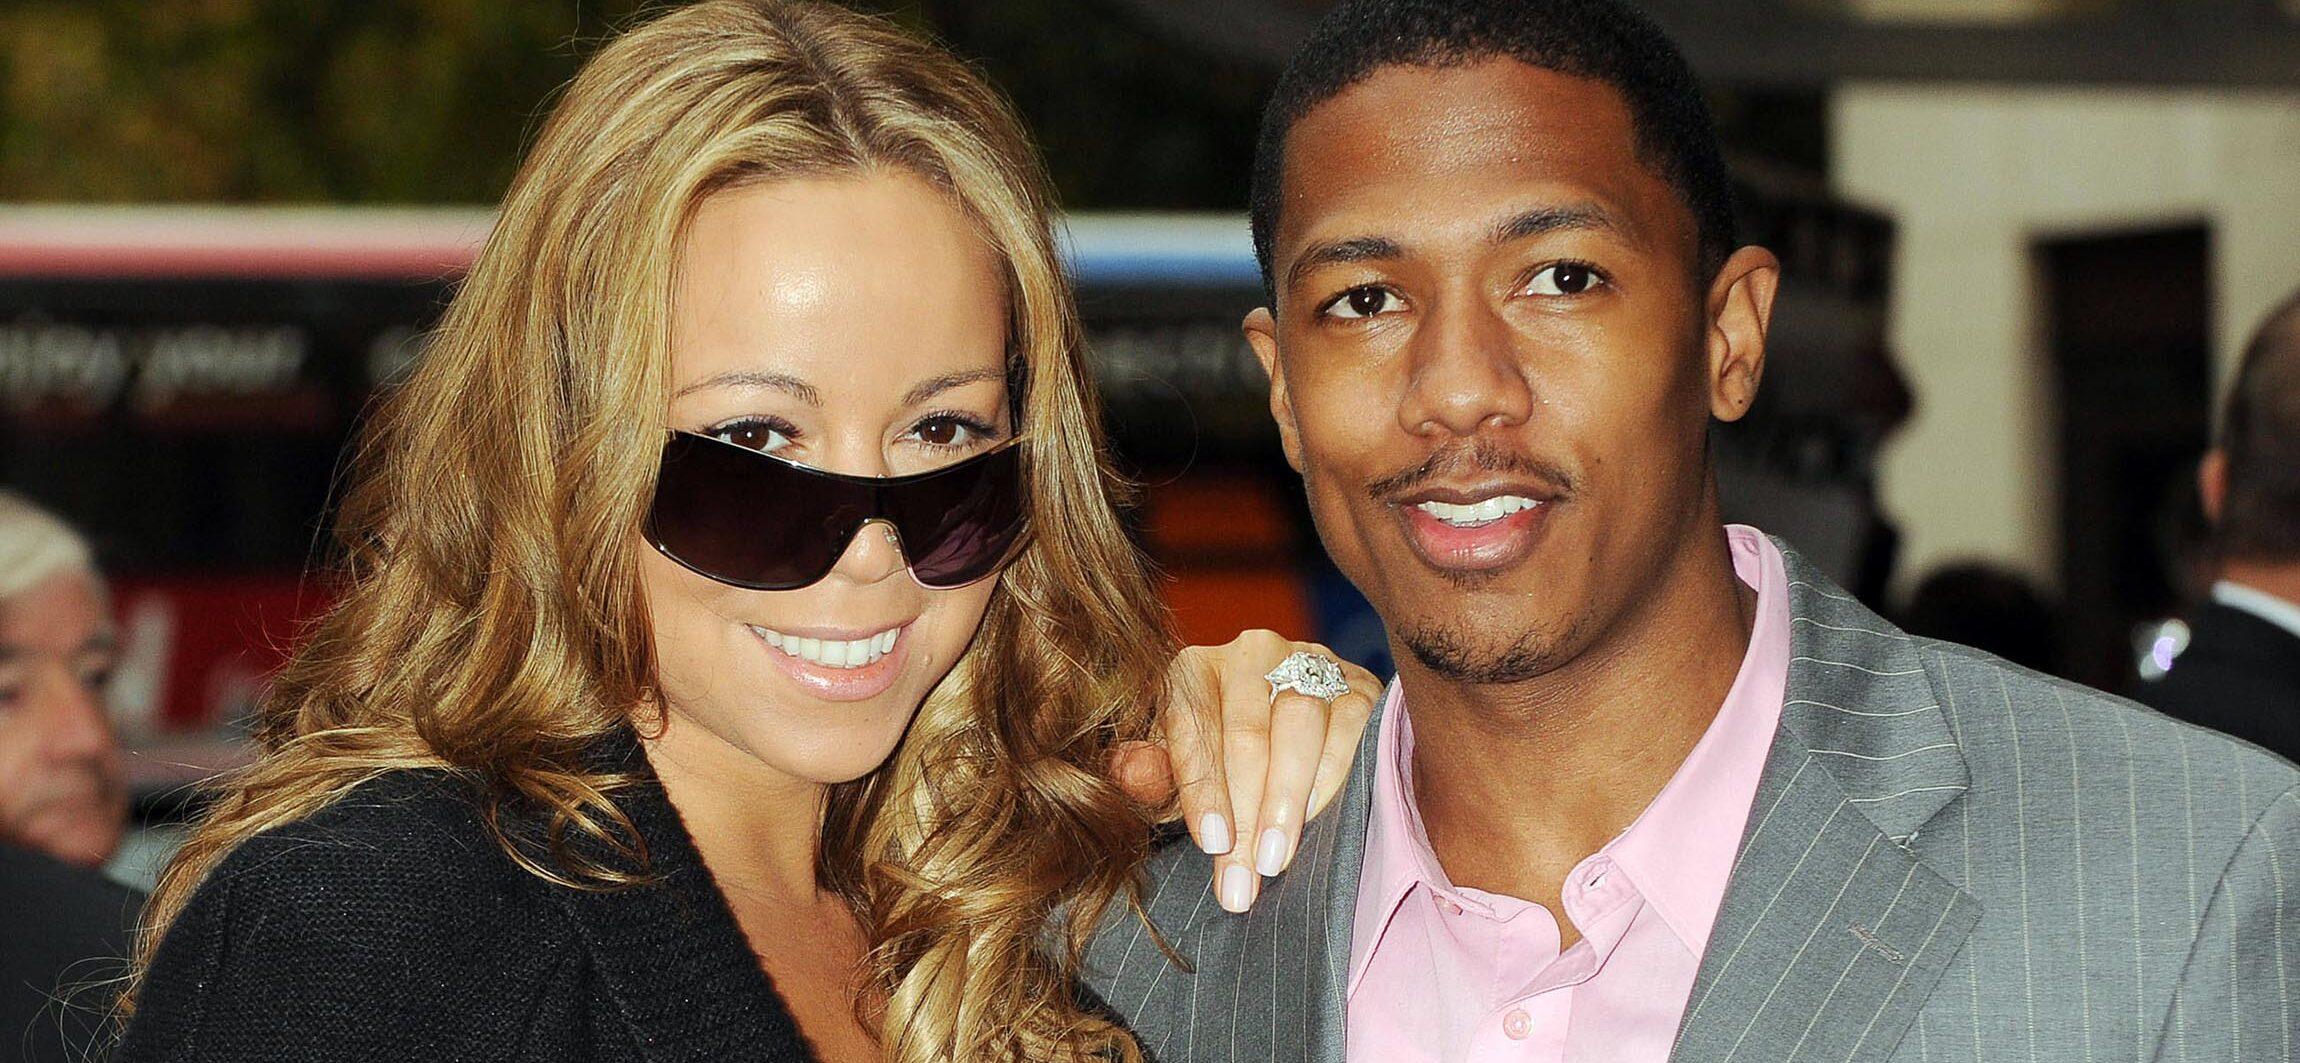 Nick Cannon Says Staying Divorced From Mariah Carey Is ‘Healthier’ For Their Children